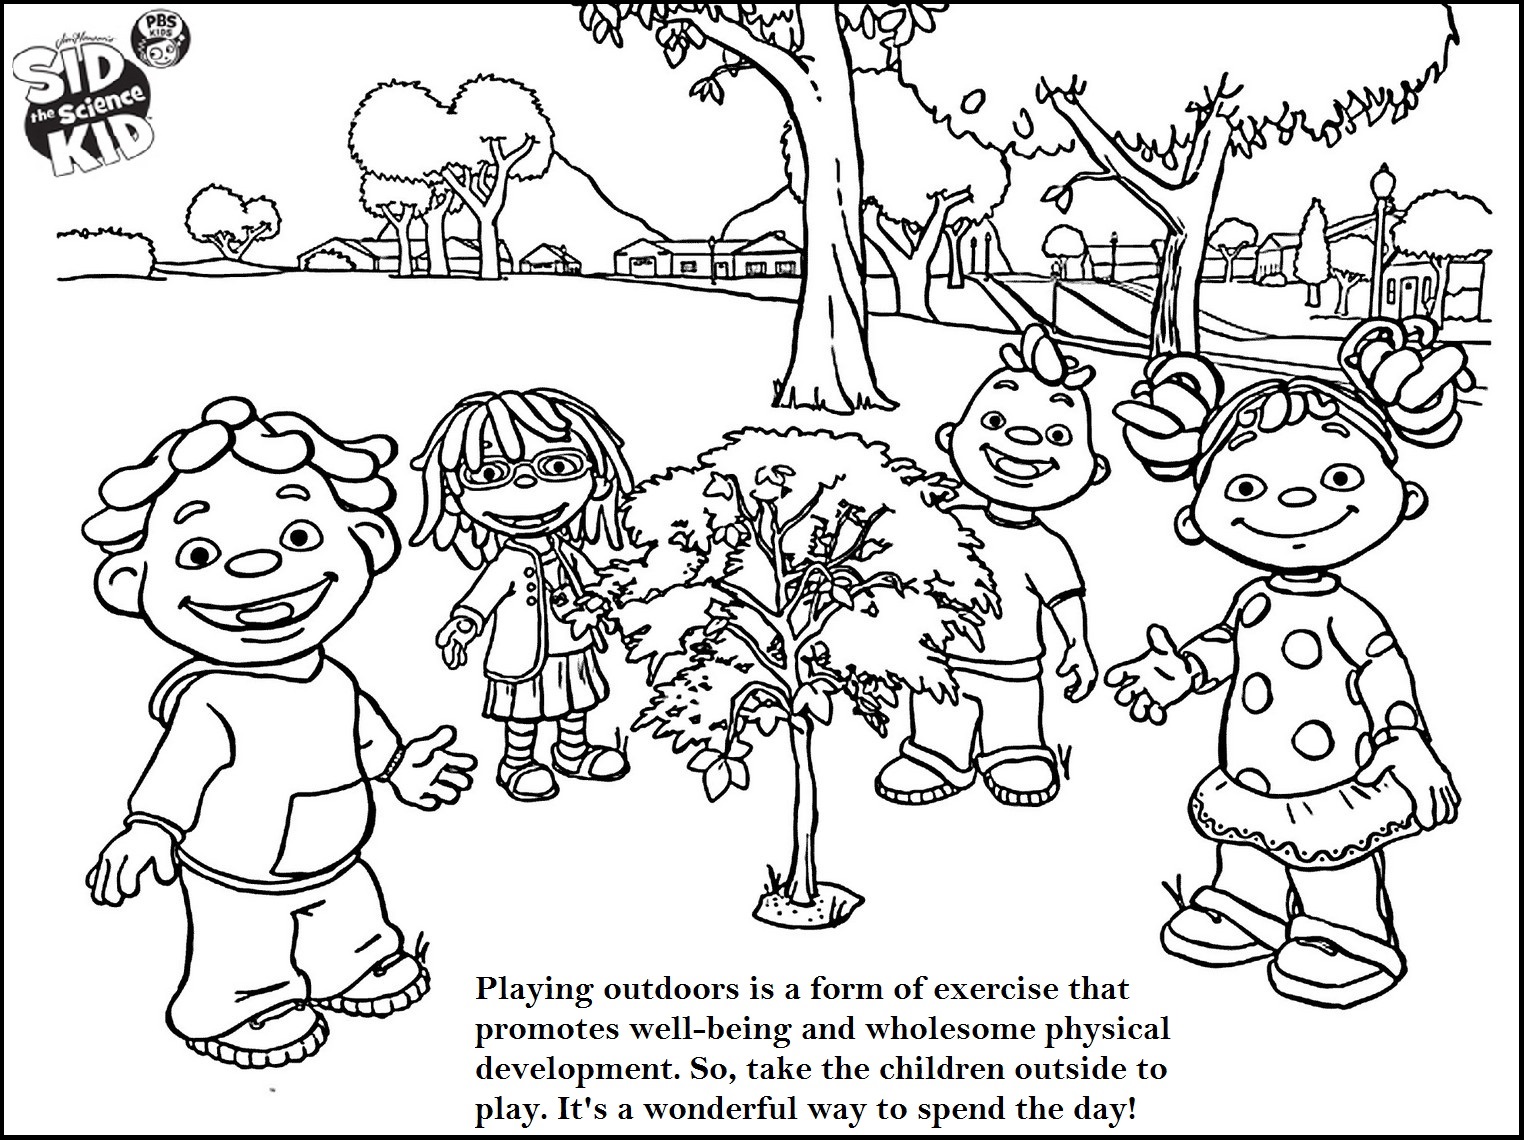 sid the science kid playing outdoor with friends coloring page